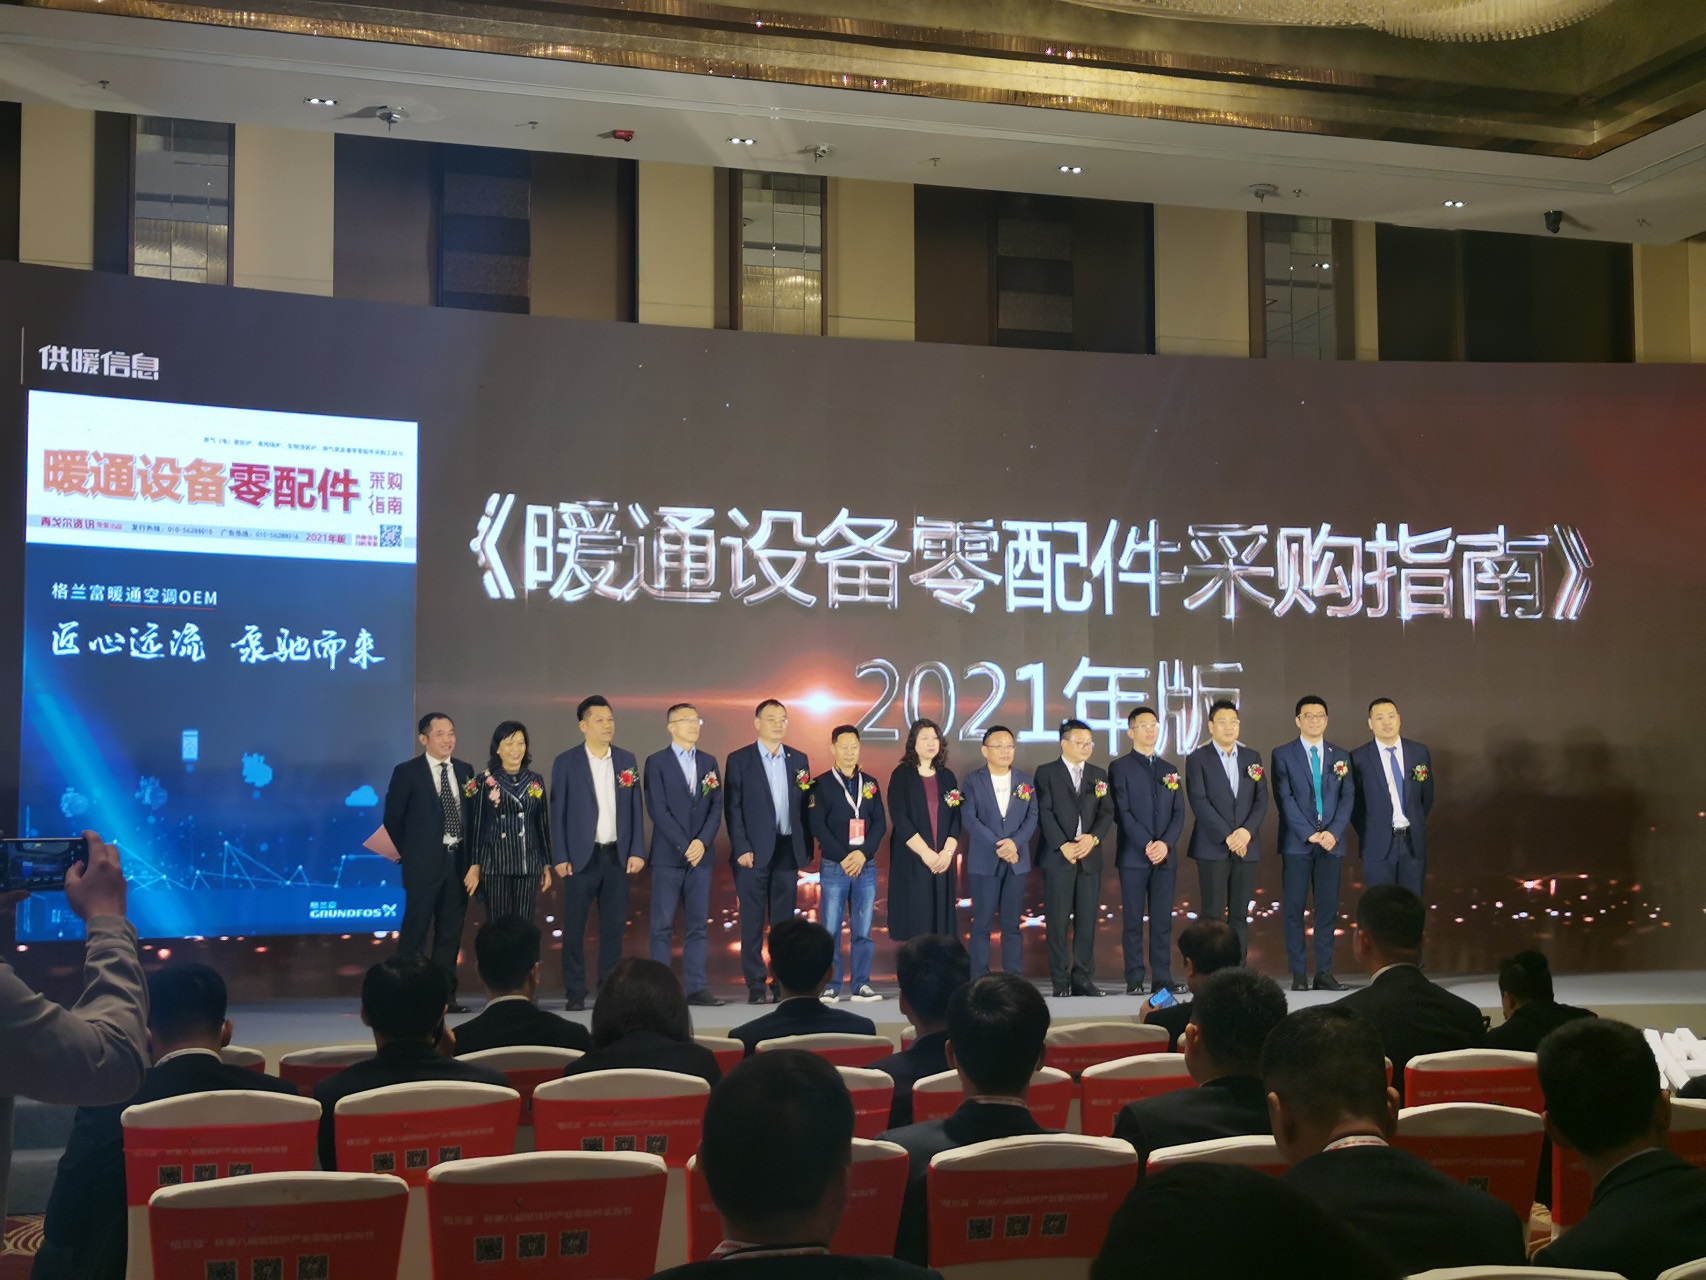 Our company participated in the 2021 "Grundfos Cup" the 8th Wall-hung Boiler Industry Parts Purchasing Festival